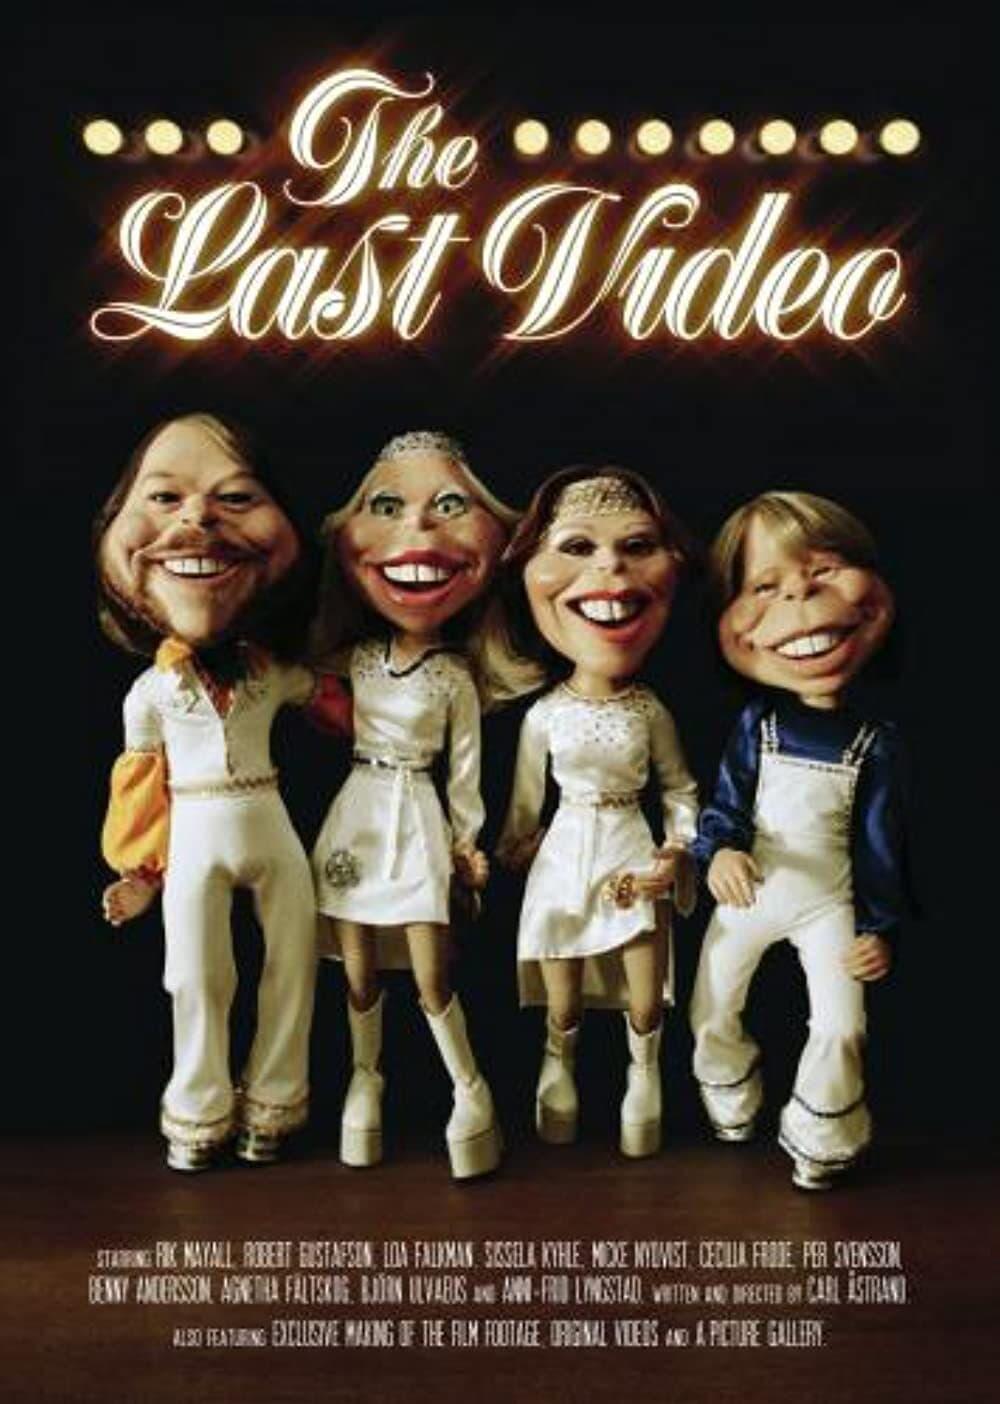 ABBA - The Last Video poster